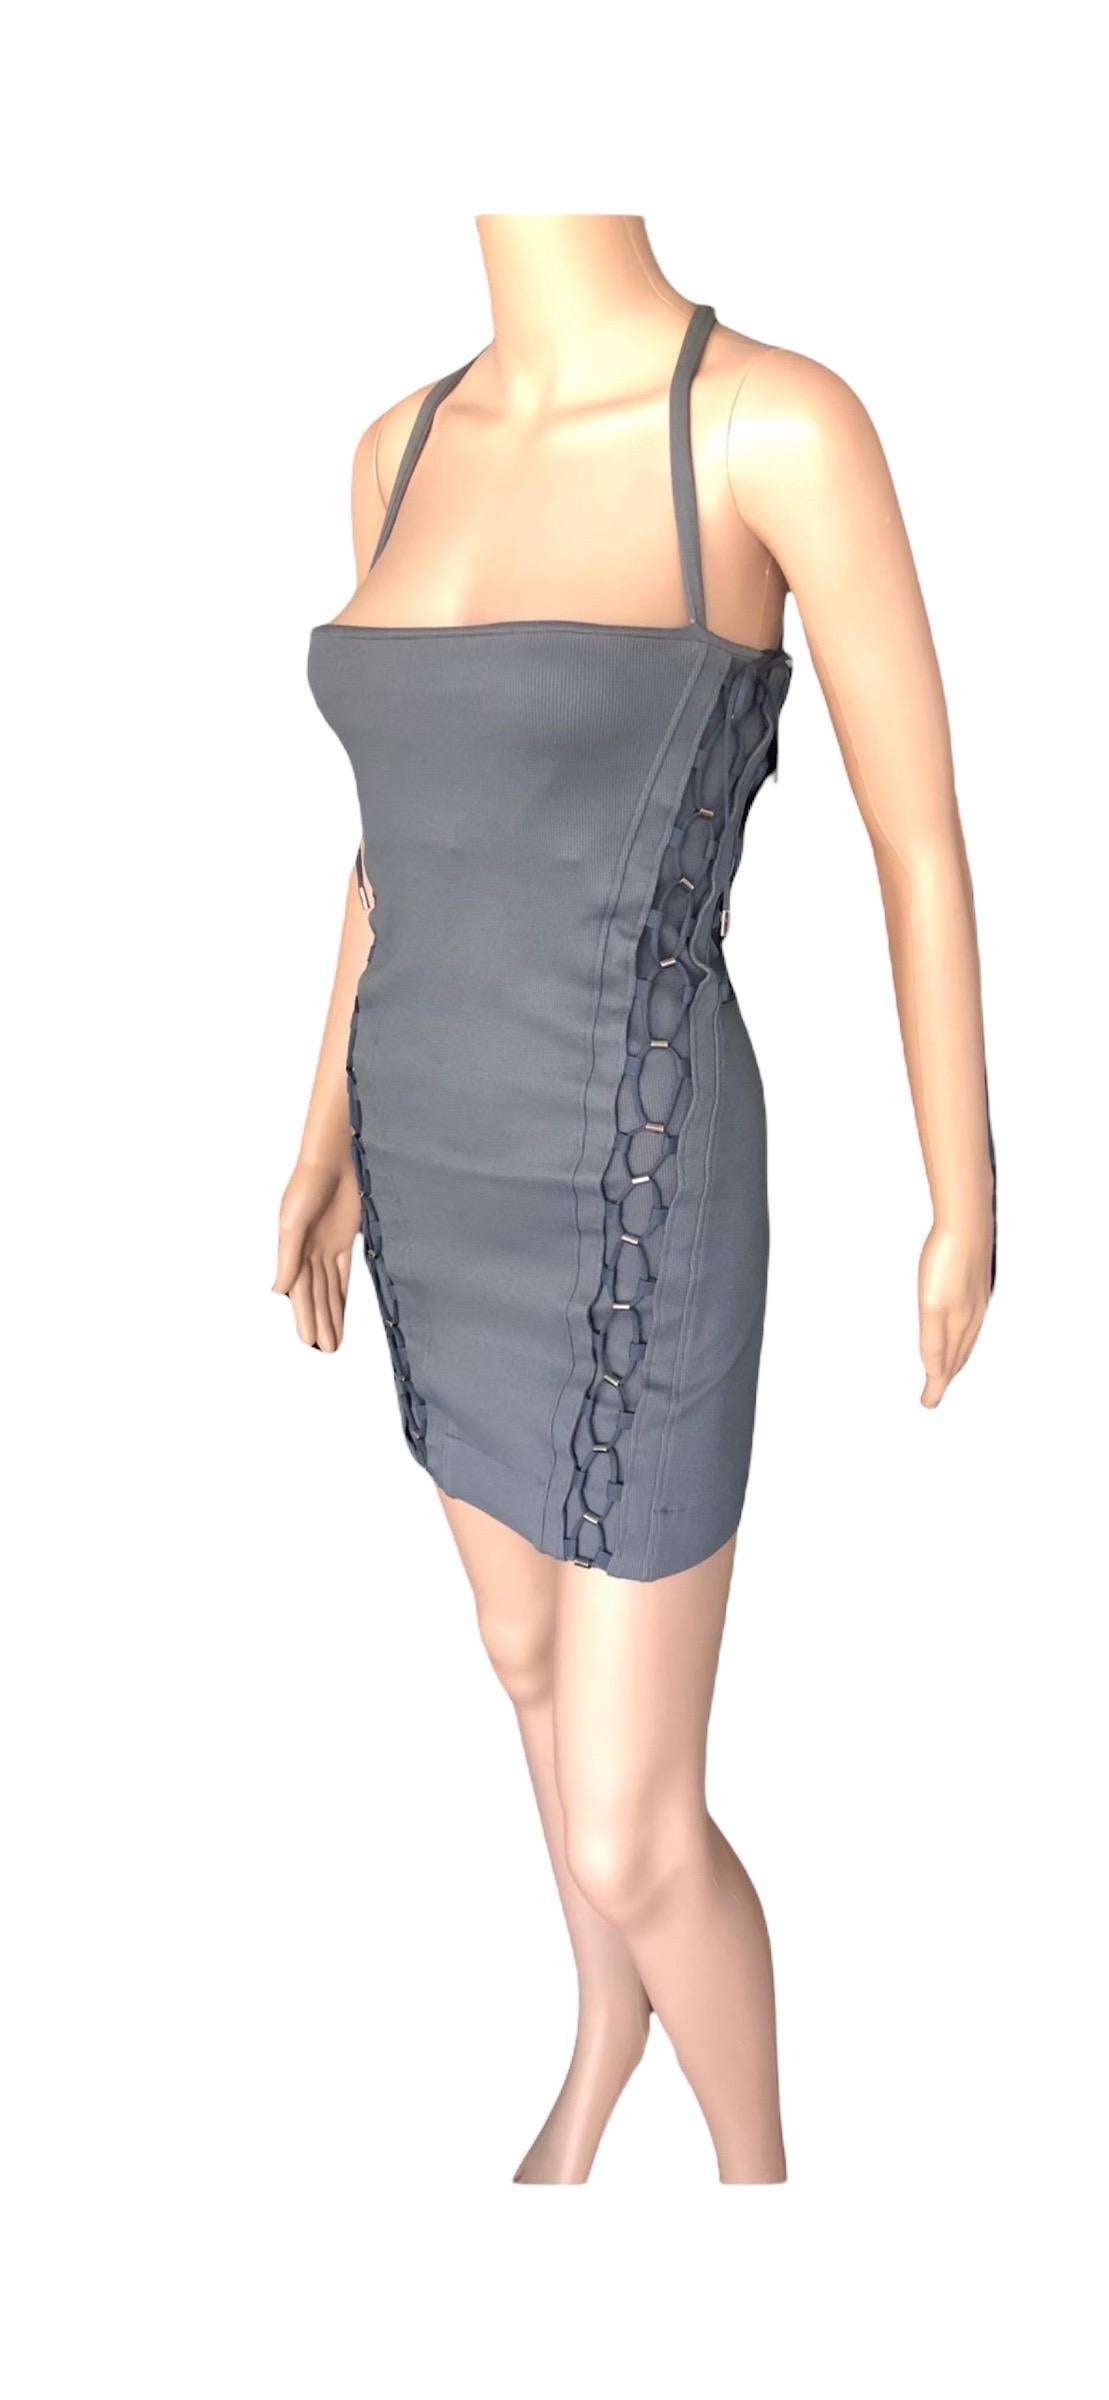 Gucci S/S 2010 Bodycon Lace Up Bandage Grey Mini Dress

Please note the size and fabric tags have been removed. This item will best fit size XS/S.
